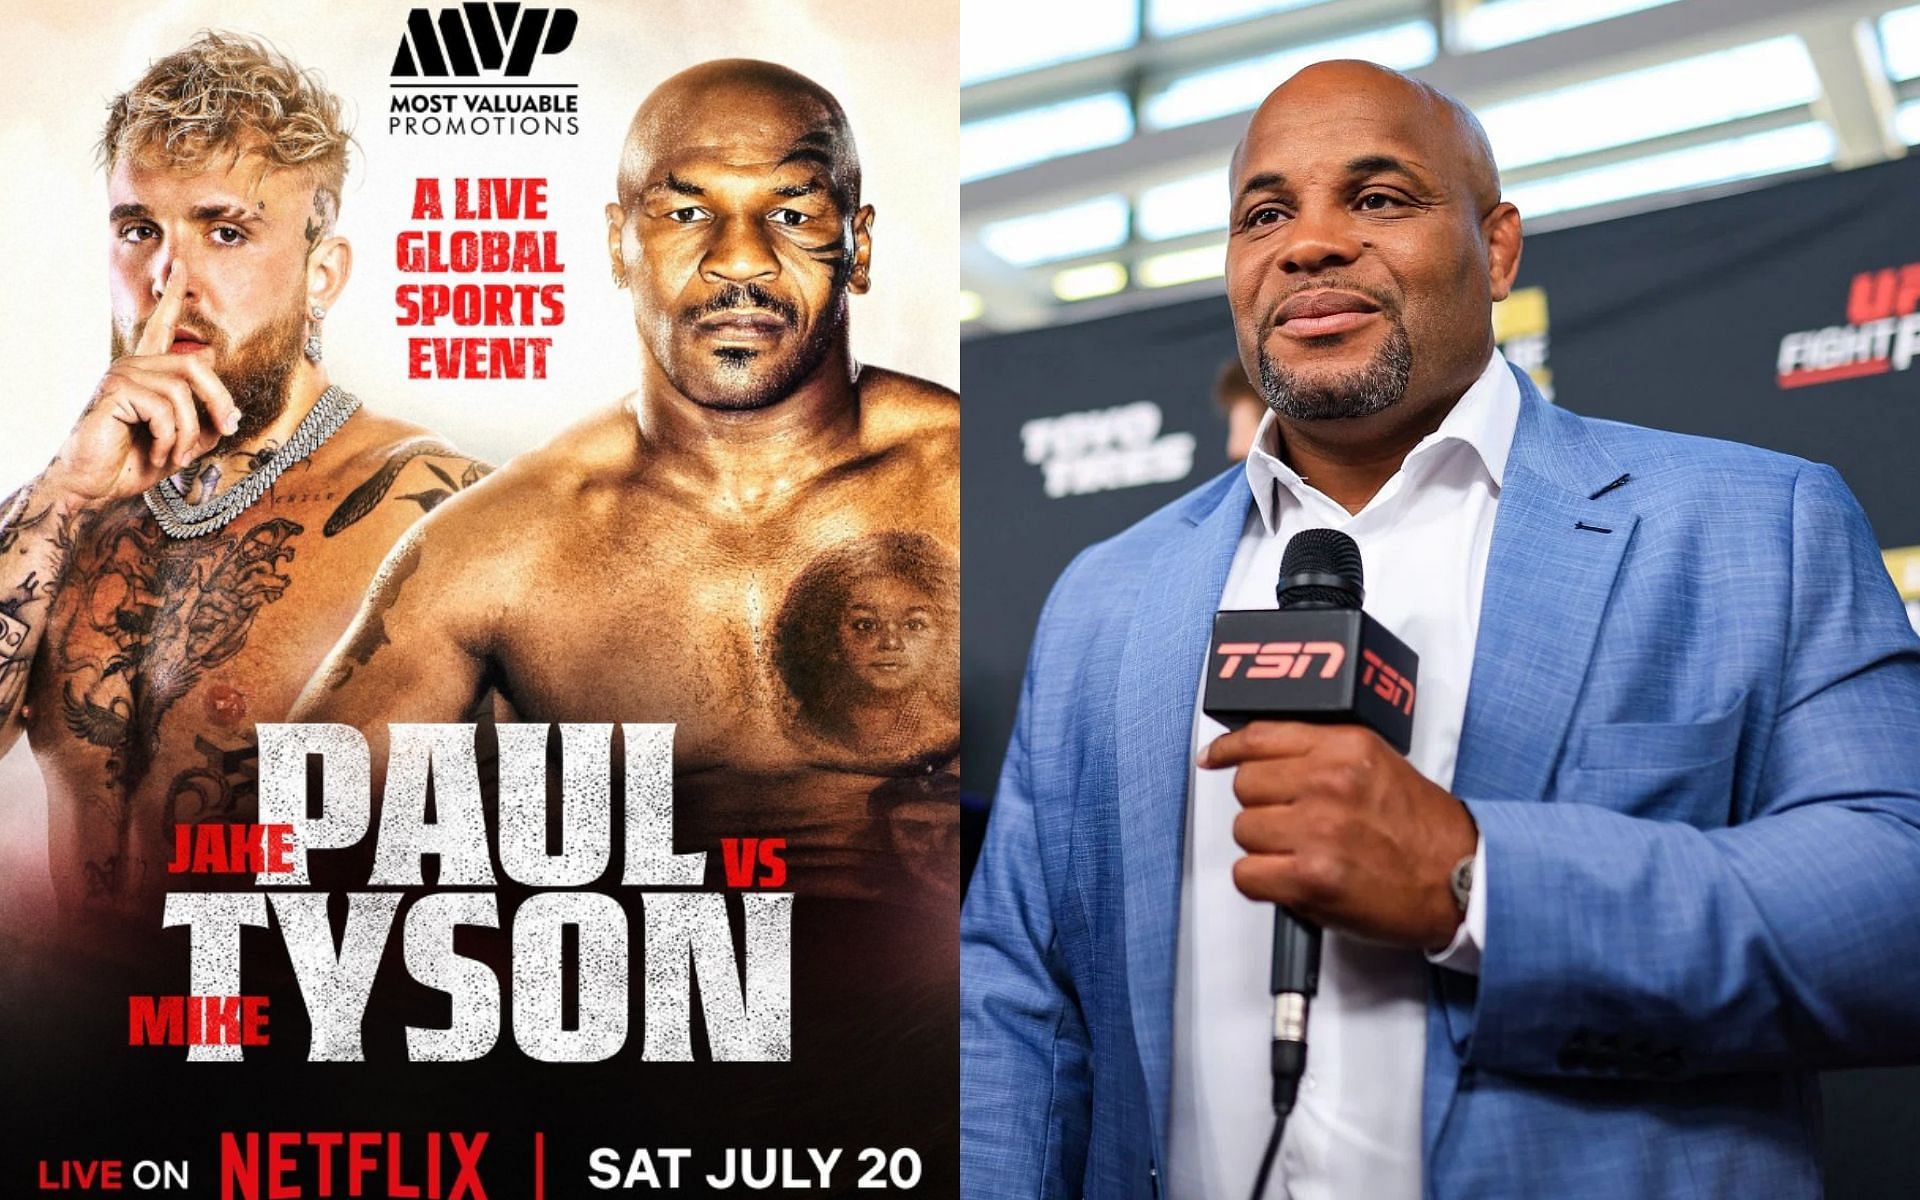 Jake Paul vs. Mike Tyson (left) receives a positive preview from Daniel Cormier (right) [Images Courtesy: @GettyImages, @jakepauil on Instagram]